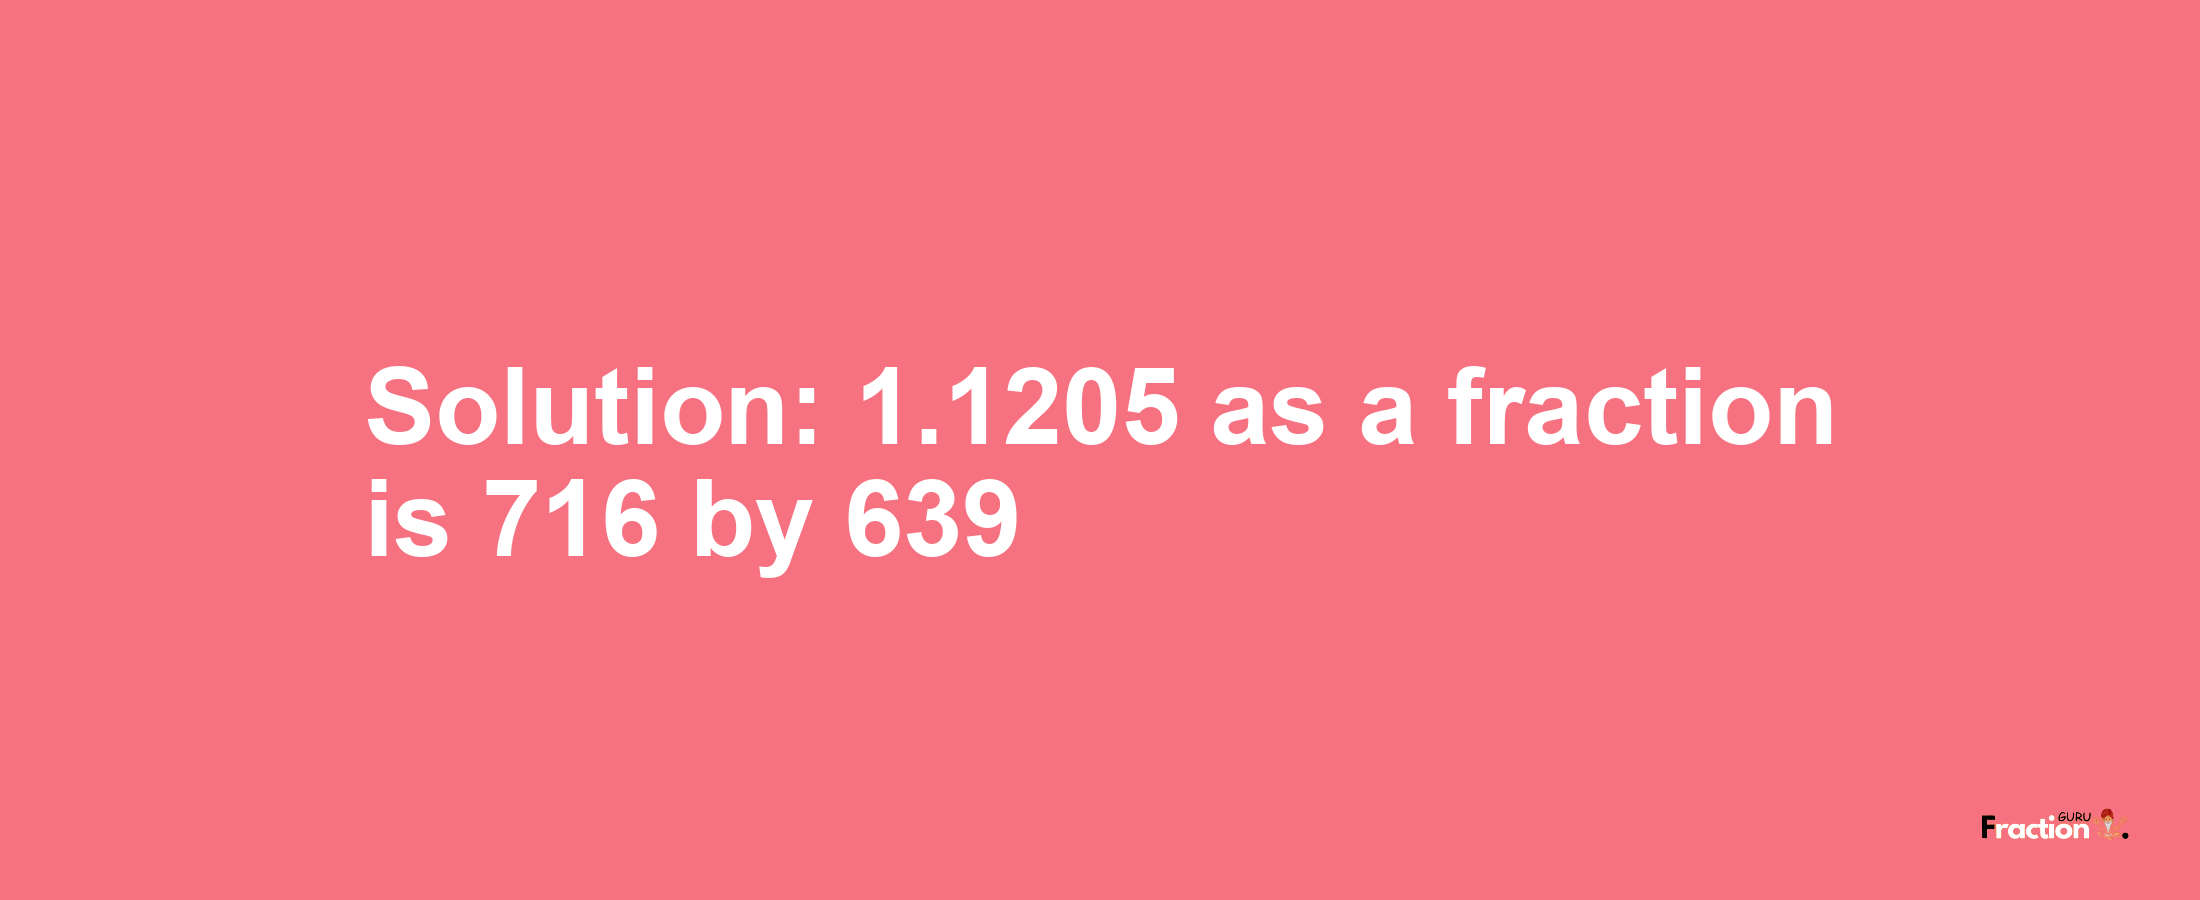 Solution:1.1205 as a fraction is 716/639